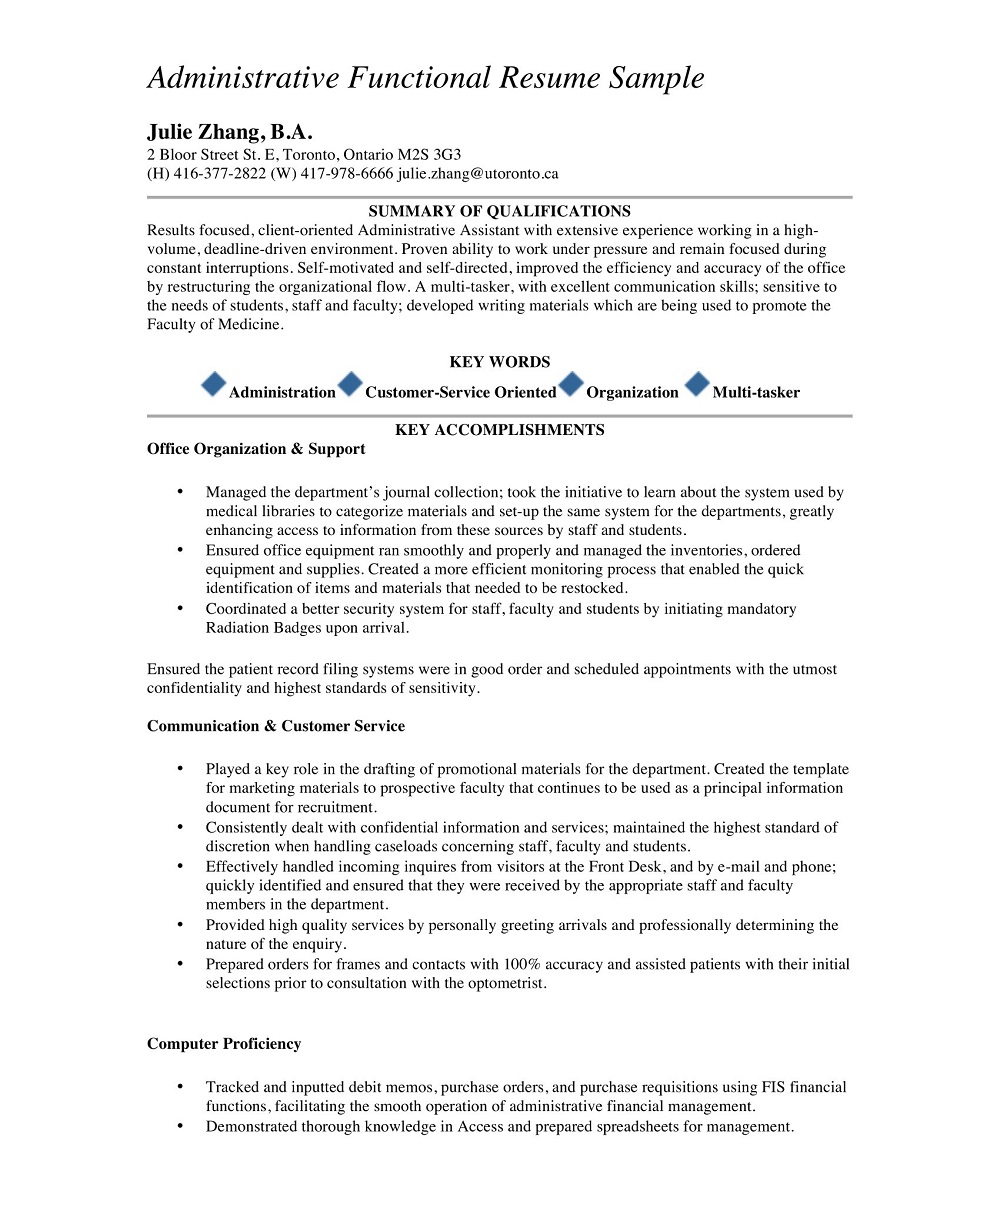 Administrative Experience Resume Template